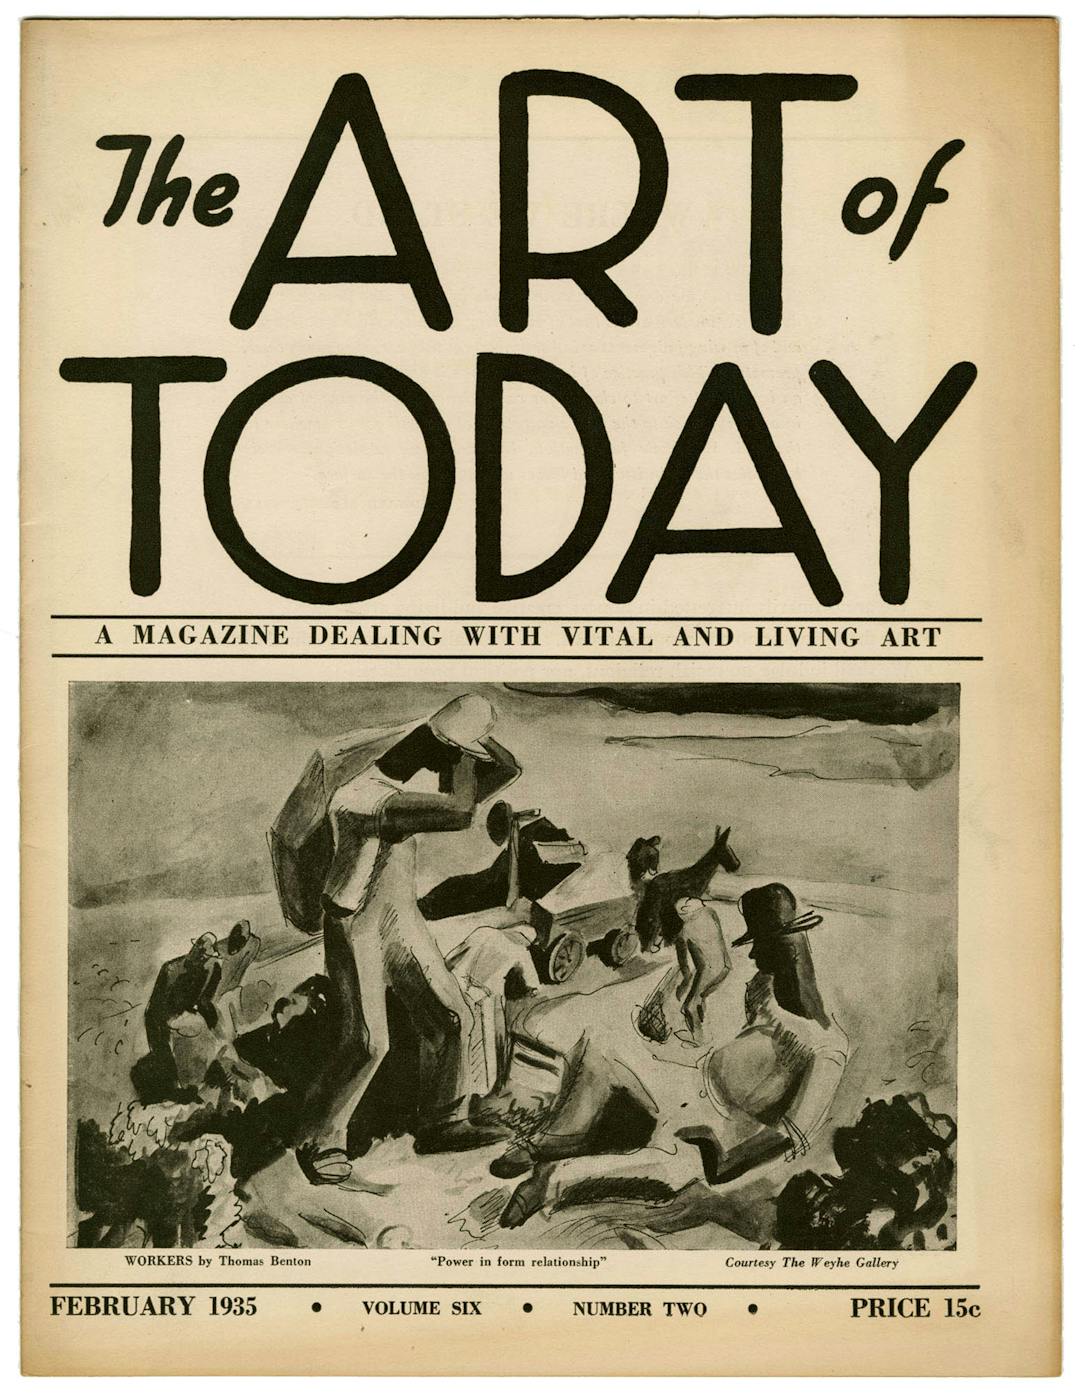 The Art of Today, Vol 6, no. 2, February 1935 – The Richard Pousette-Dart Foundation